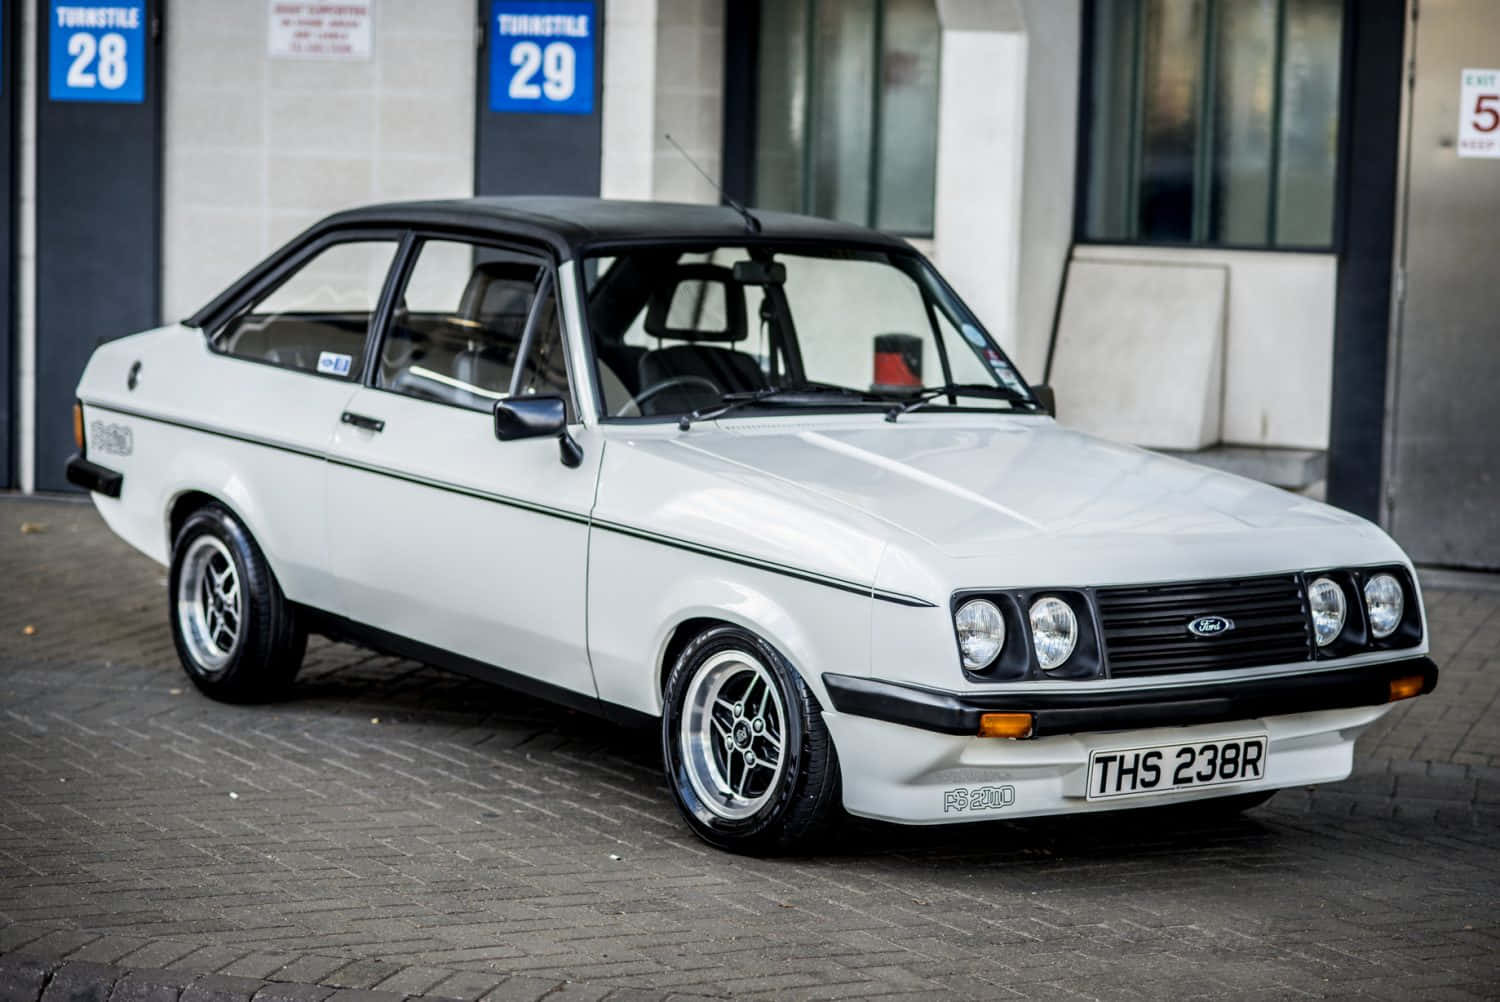 Classic Ford Escort showcased at an automobile event Wallpaper